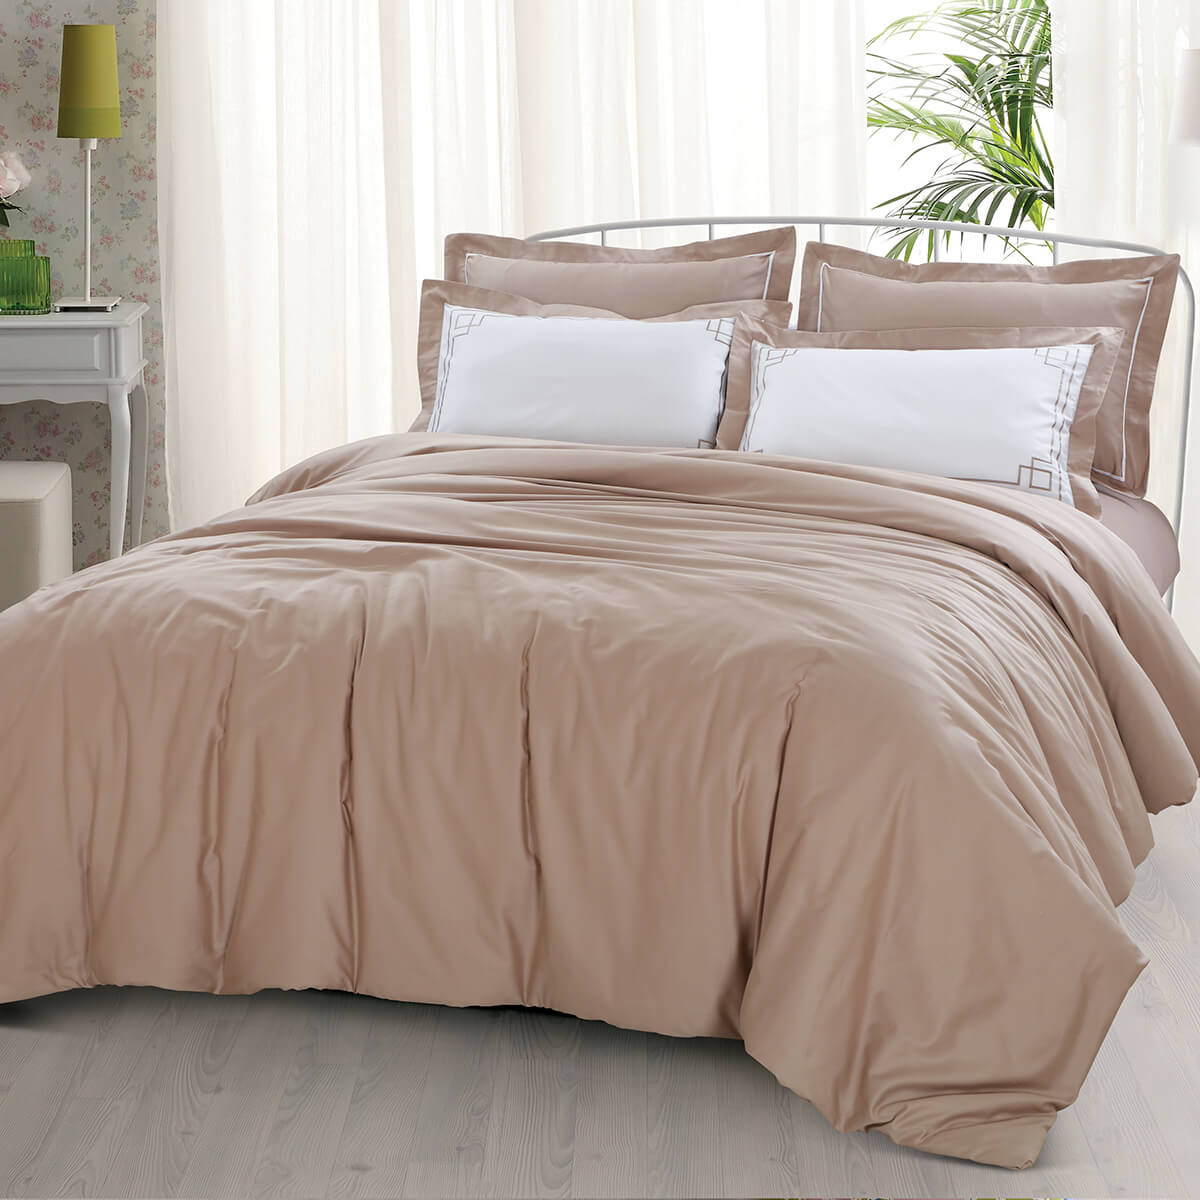 Malako Grace Embroidered Bed Sheet - Beige Solid King Size 100% Cotton Bedsheet With 4 Pillow Covers - MALAKO